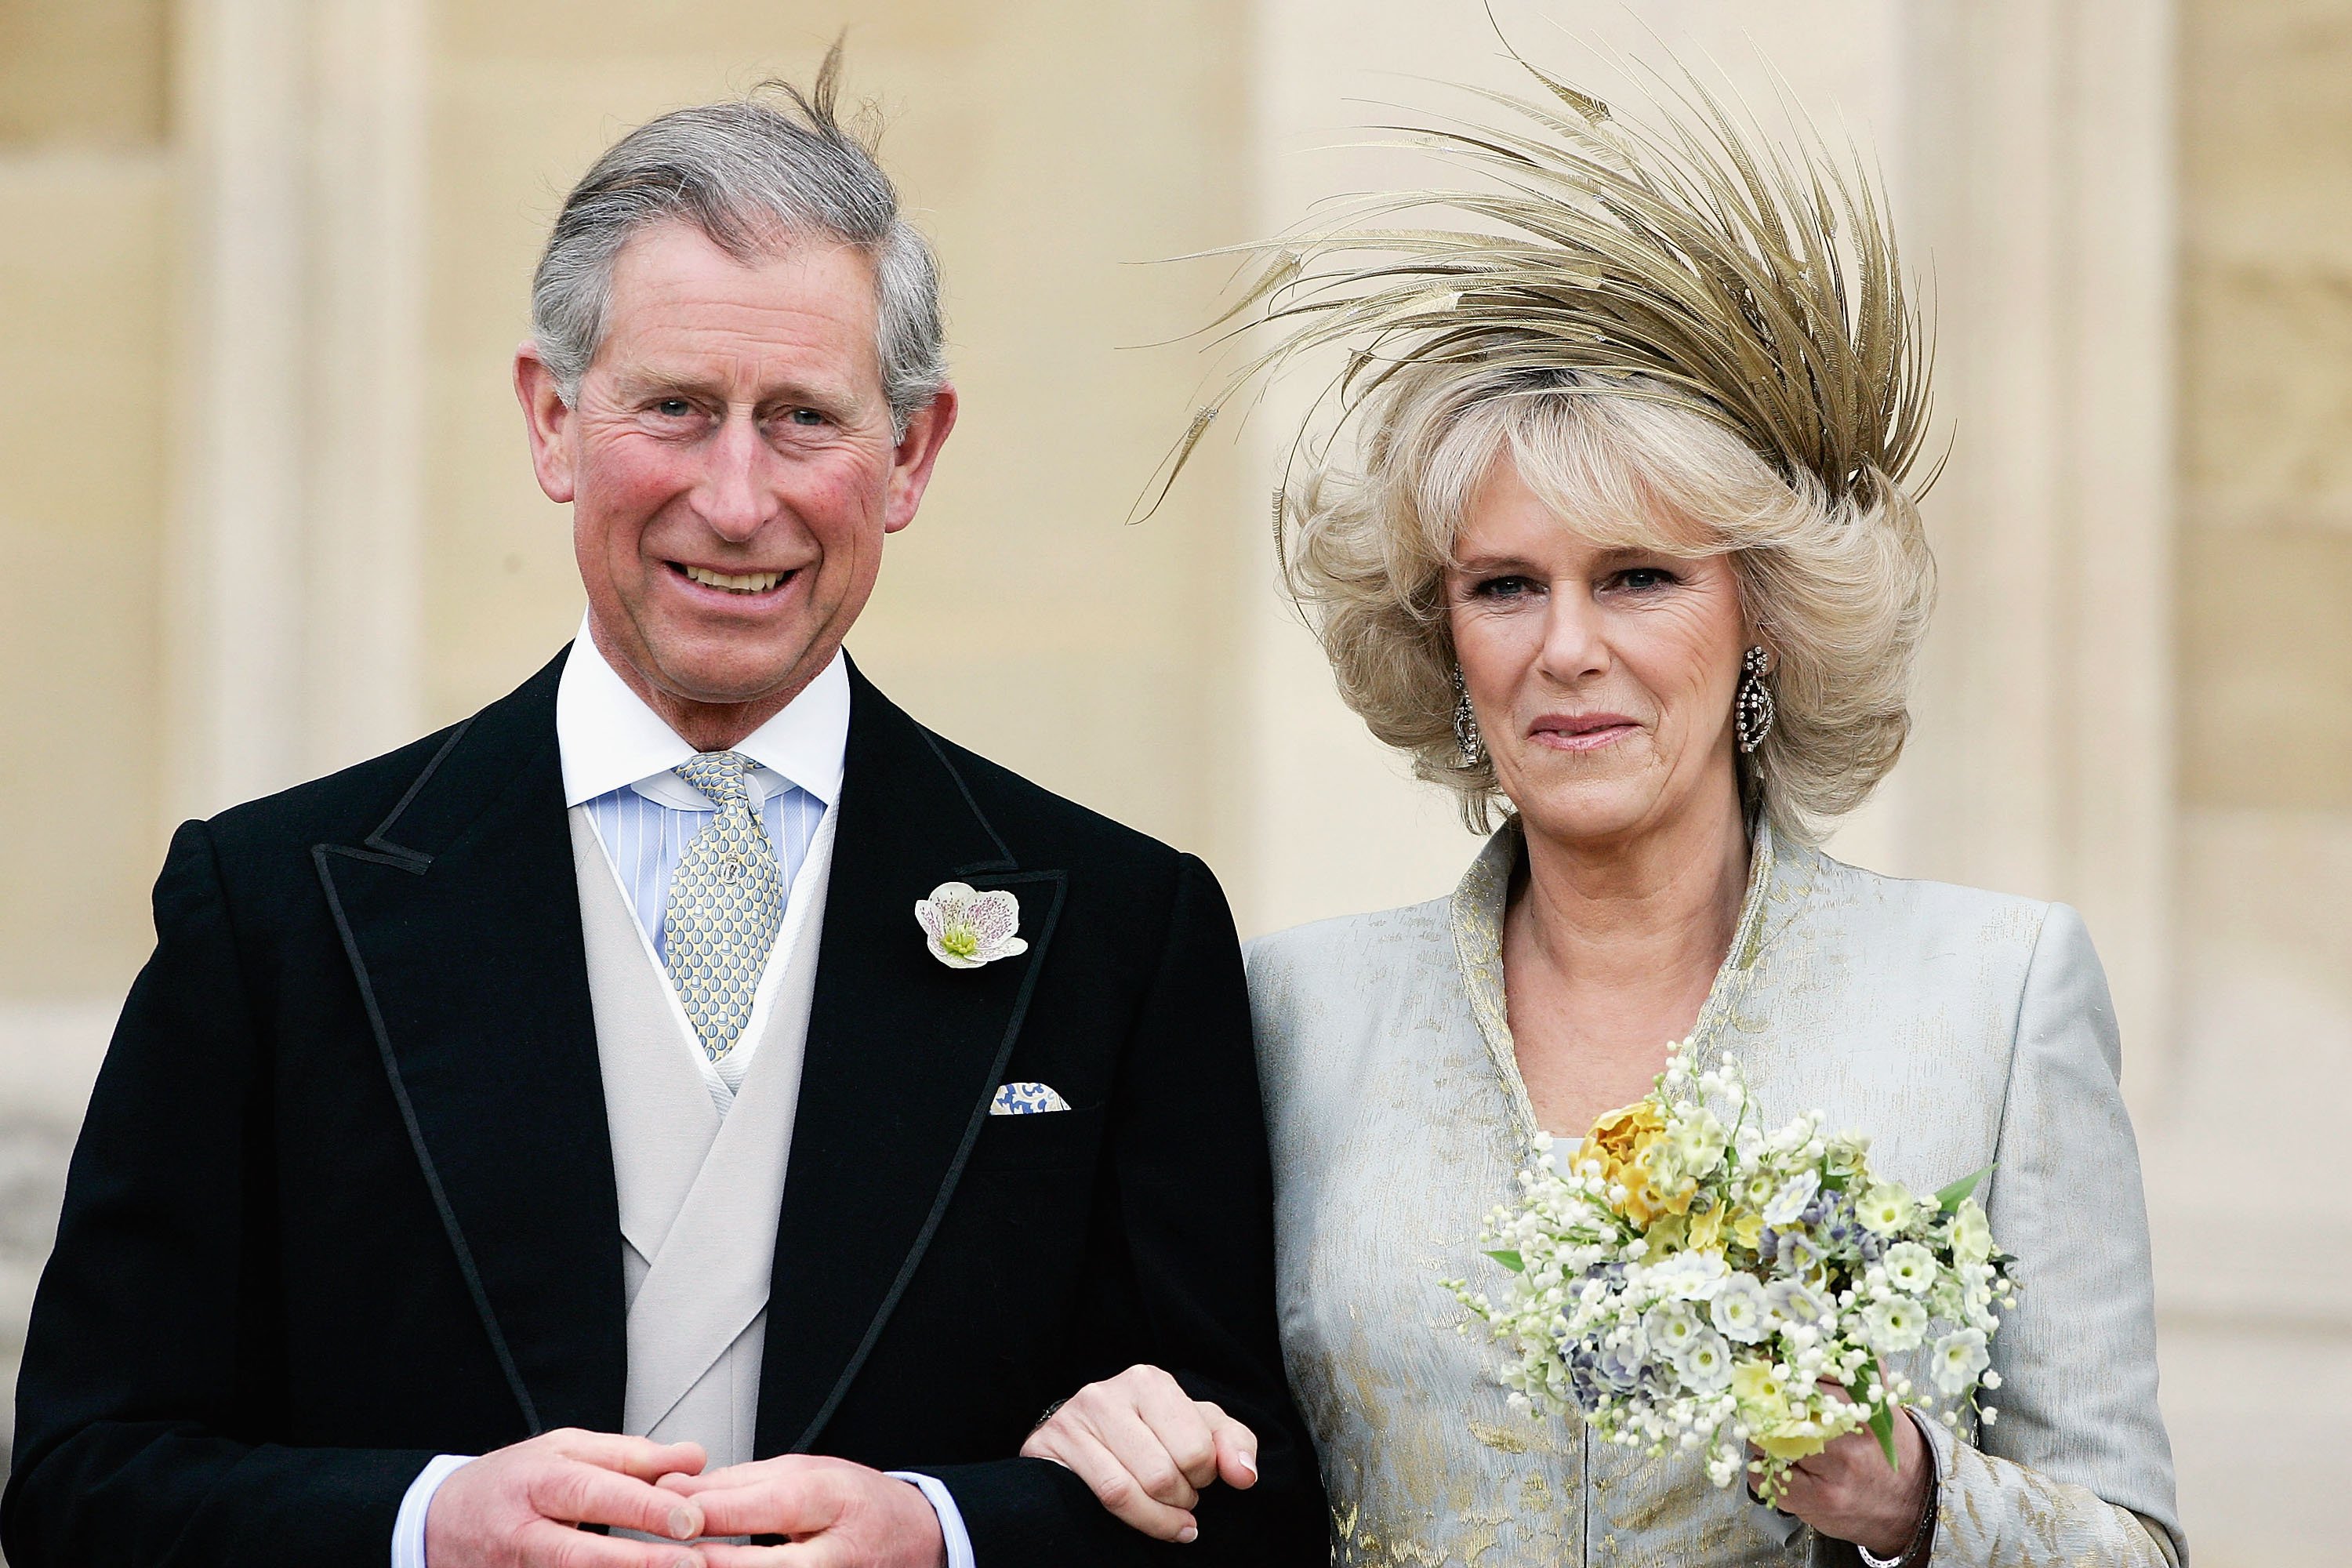 HRH the Prince of Wales, Prince Charles, and The Duchess of Cornwall, Camilla Parker Bowles in silk dress leaves the Service of Prayer and Dedication blessing their marriage at Windsor Castle on April 9, 2005 in Berkshire, England. Photo: Getty Images